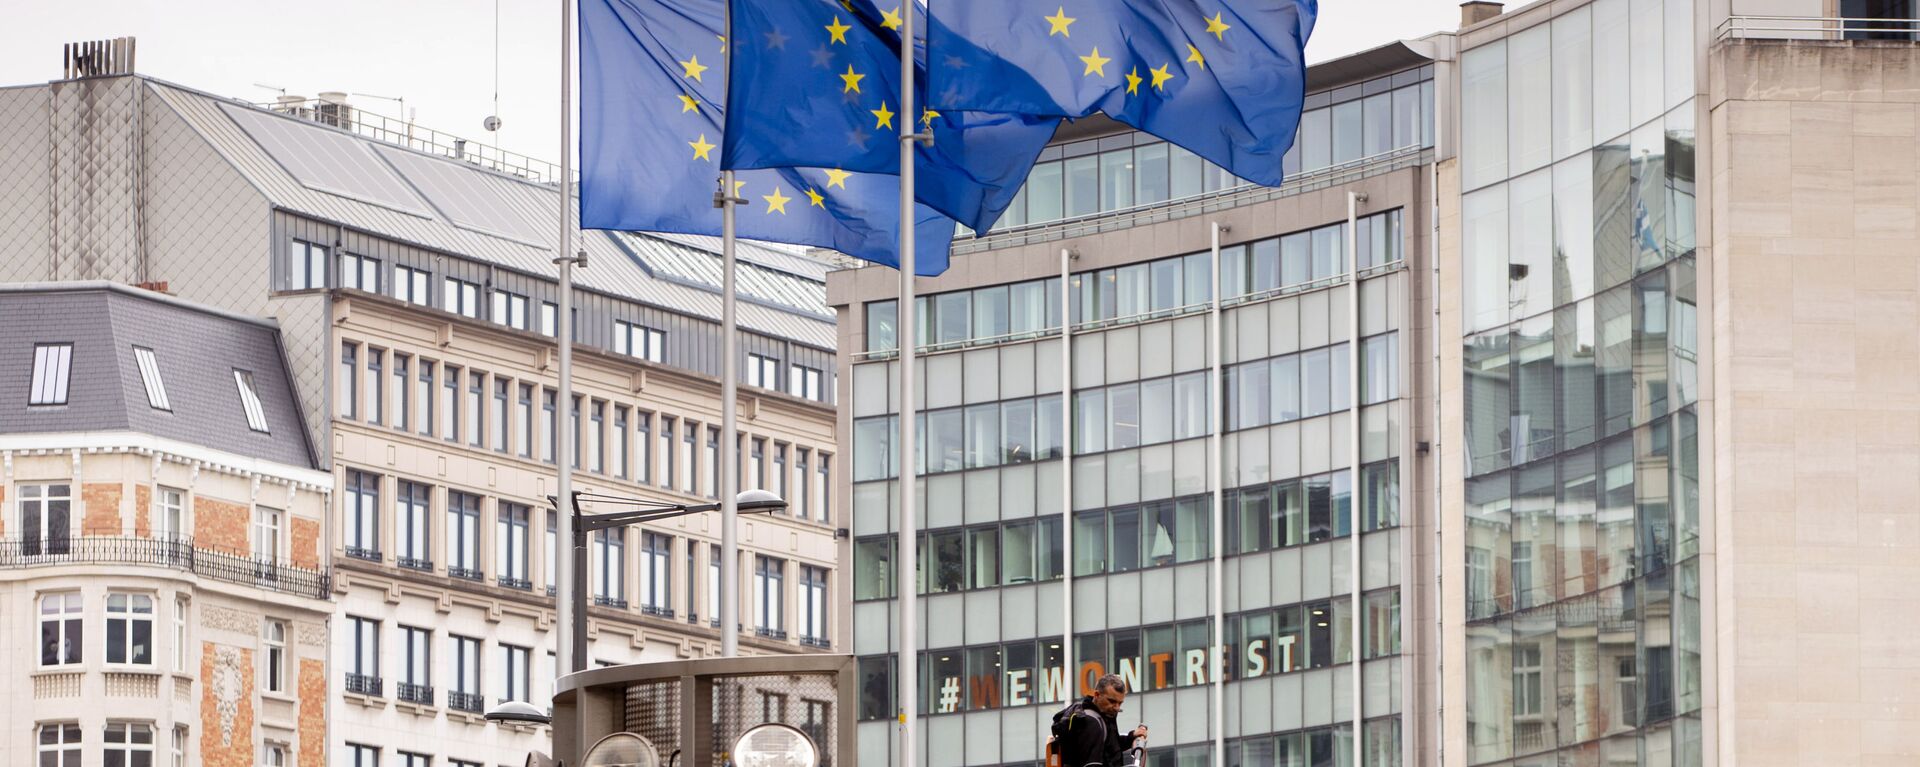 European Union flags flap in the wind as two gardeners work on the outside of EU headquarters in Brussels, Wednesday, Sept. 11, 2019.  - Sputnik International, 1920, 30.04.2021